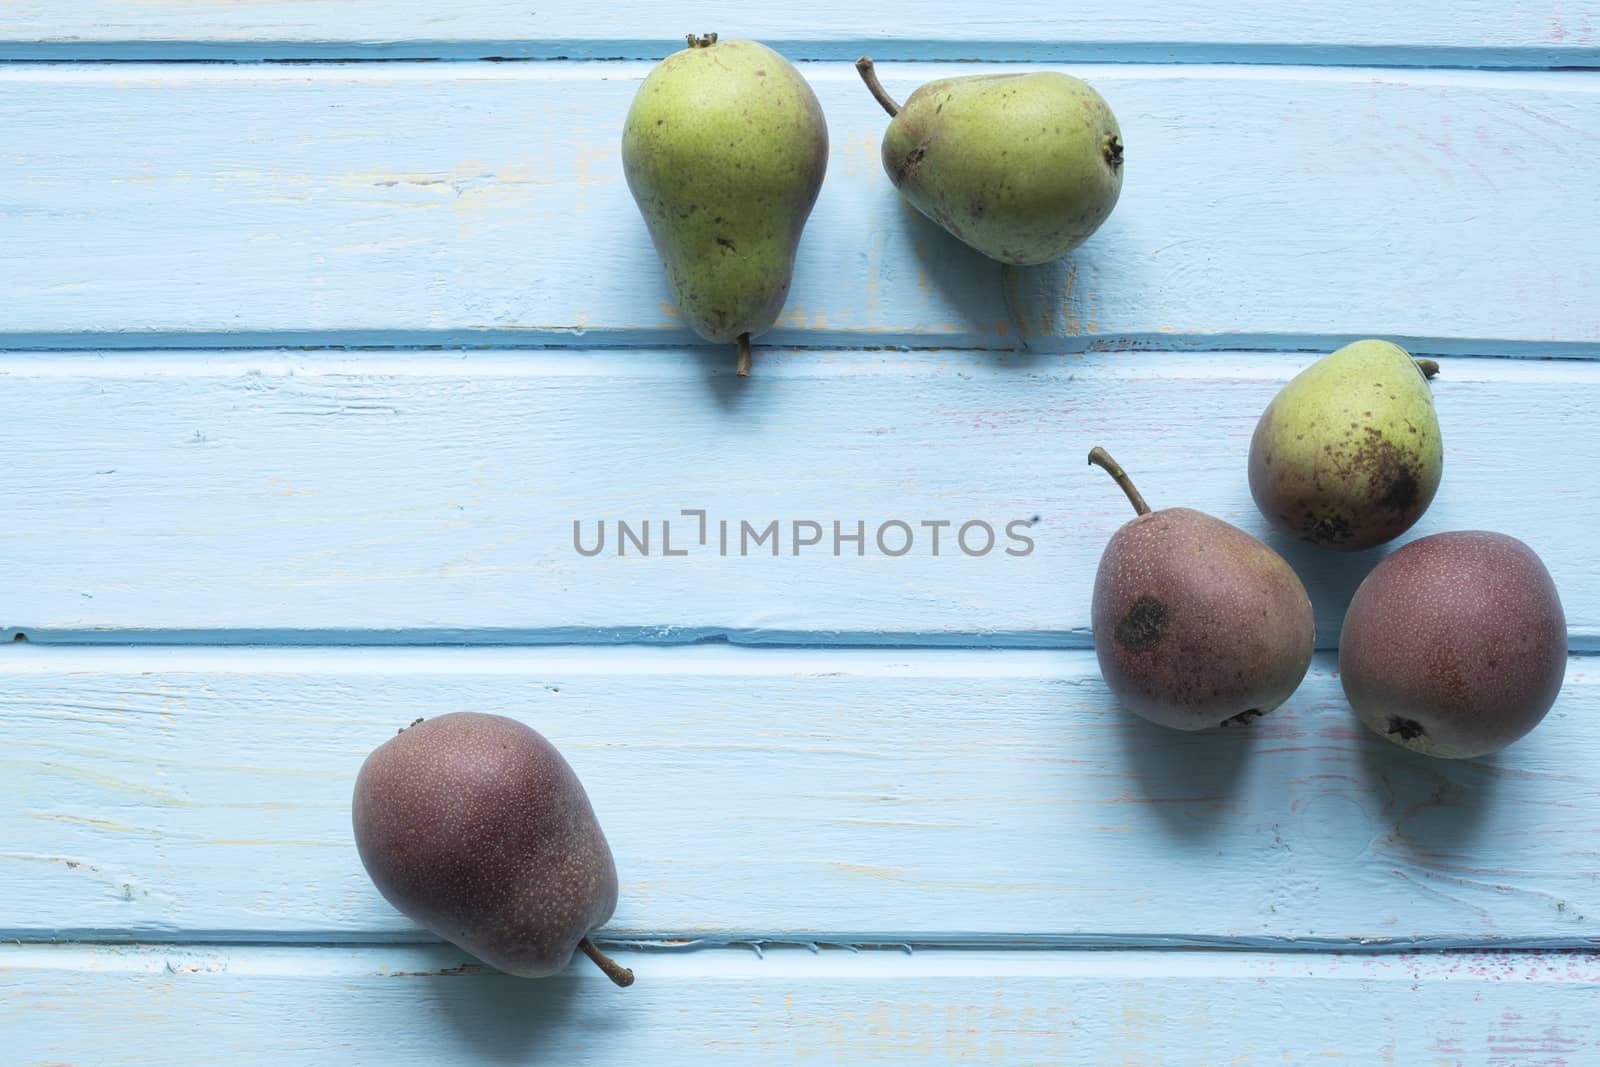 Halves of fresh ripe pears on wooden background by sashokddt